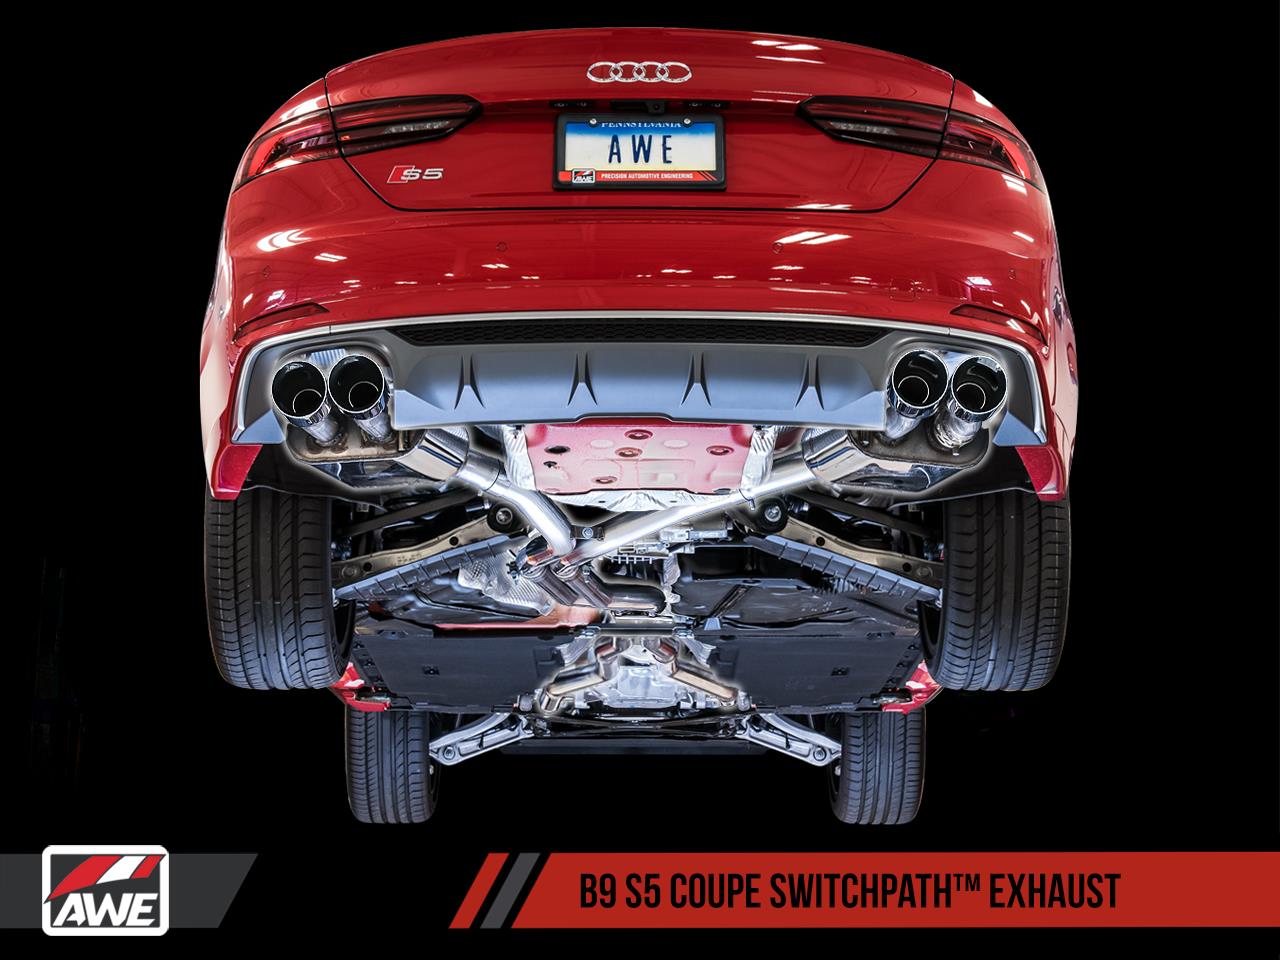 AWE RELEASES NEW EXHAUST SUITE FOR THE AUDI B9 S5 COUPE - AudiWorld